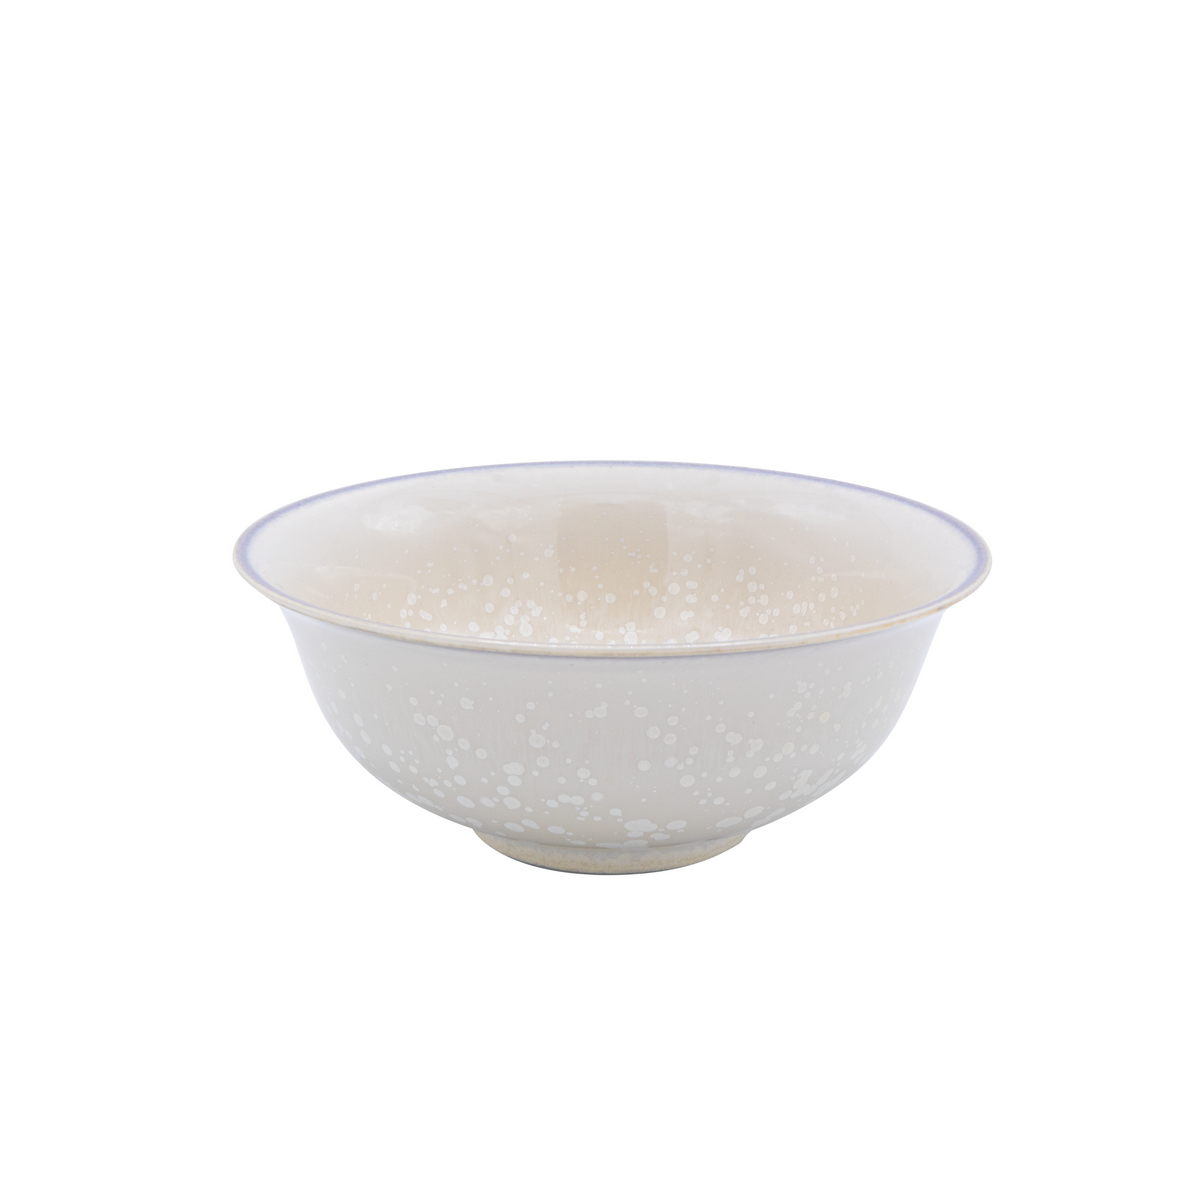 SONG Perle - Soup bowl